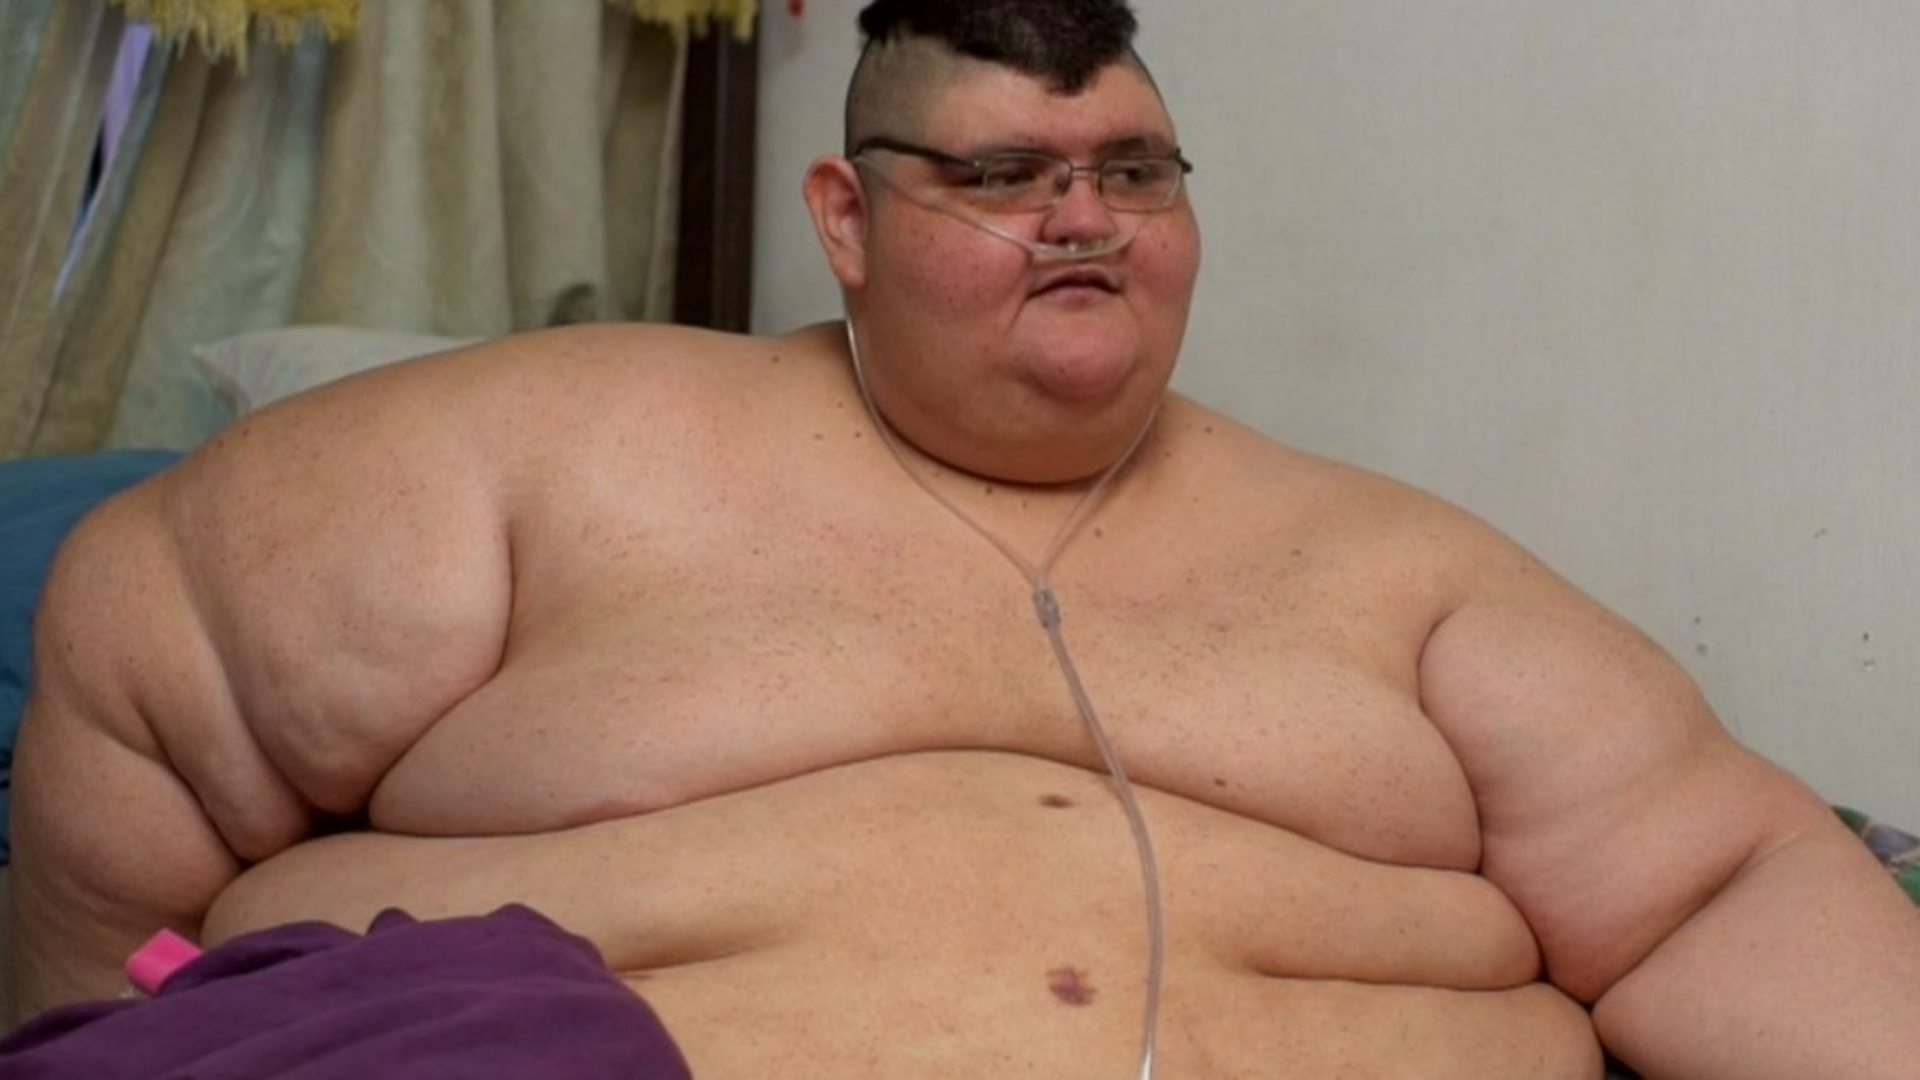 The world's most obese man's attempt to lose weight - BBC News